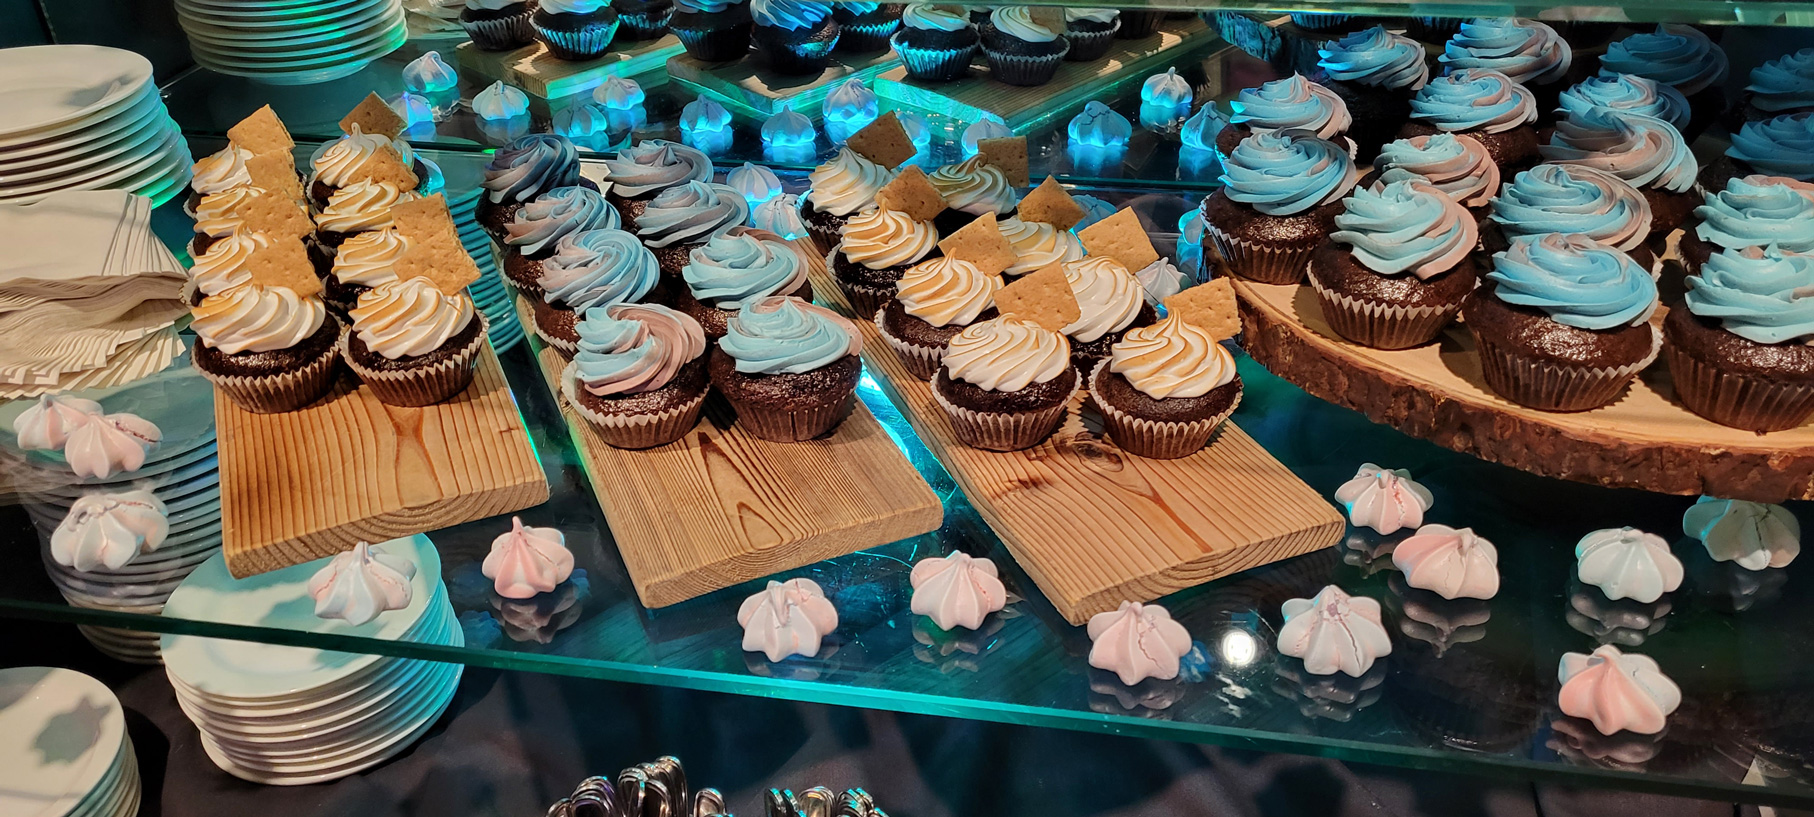 Cupcakes at Nightrise Experience